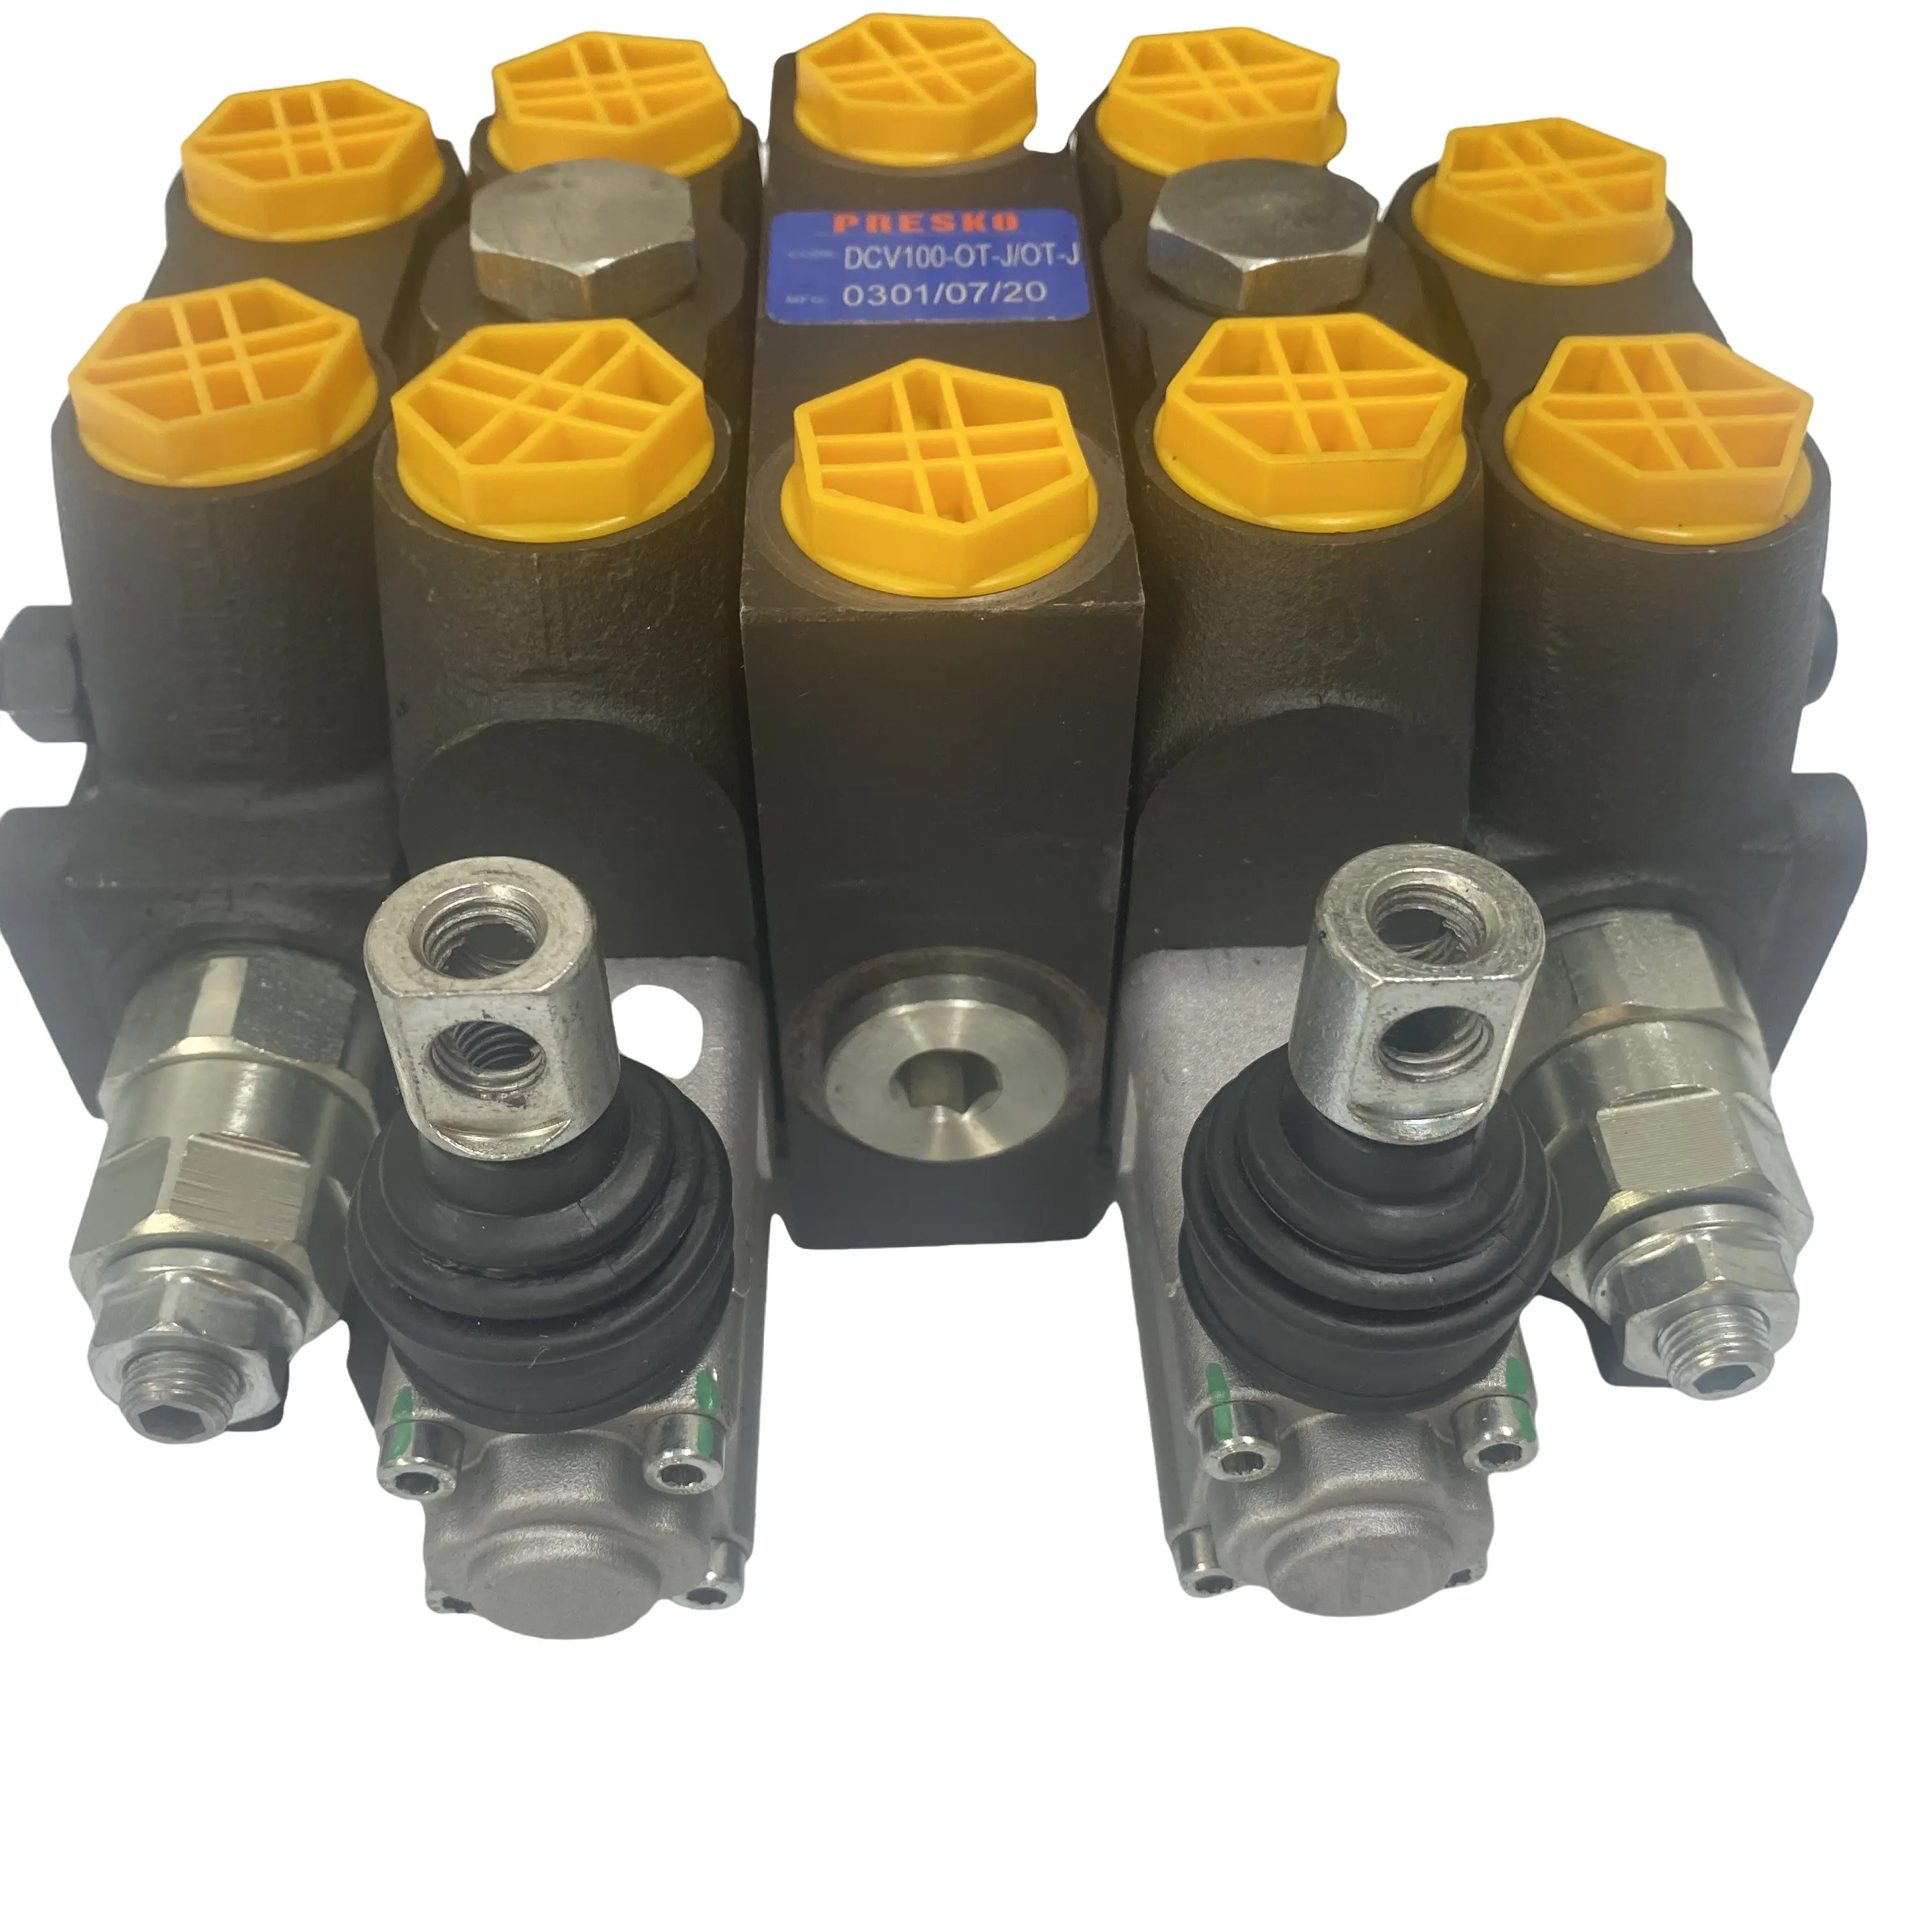 DCV100 Sectional Hydraulic Control Valve Pneumatic Control